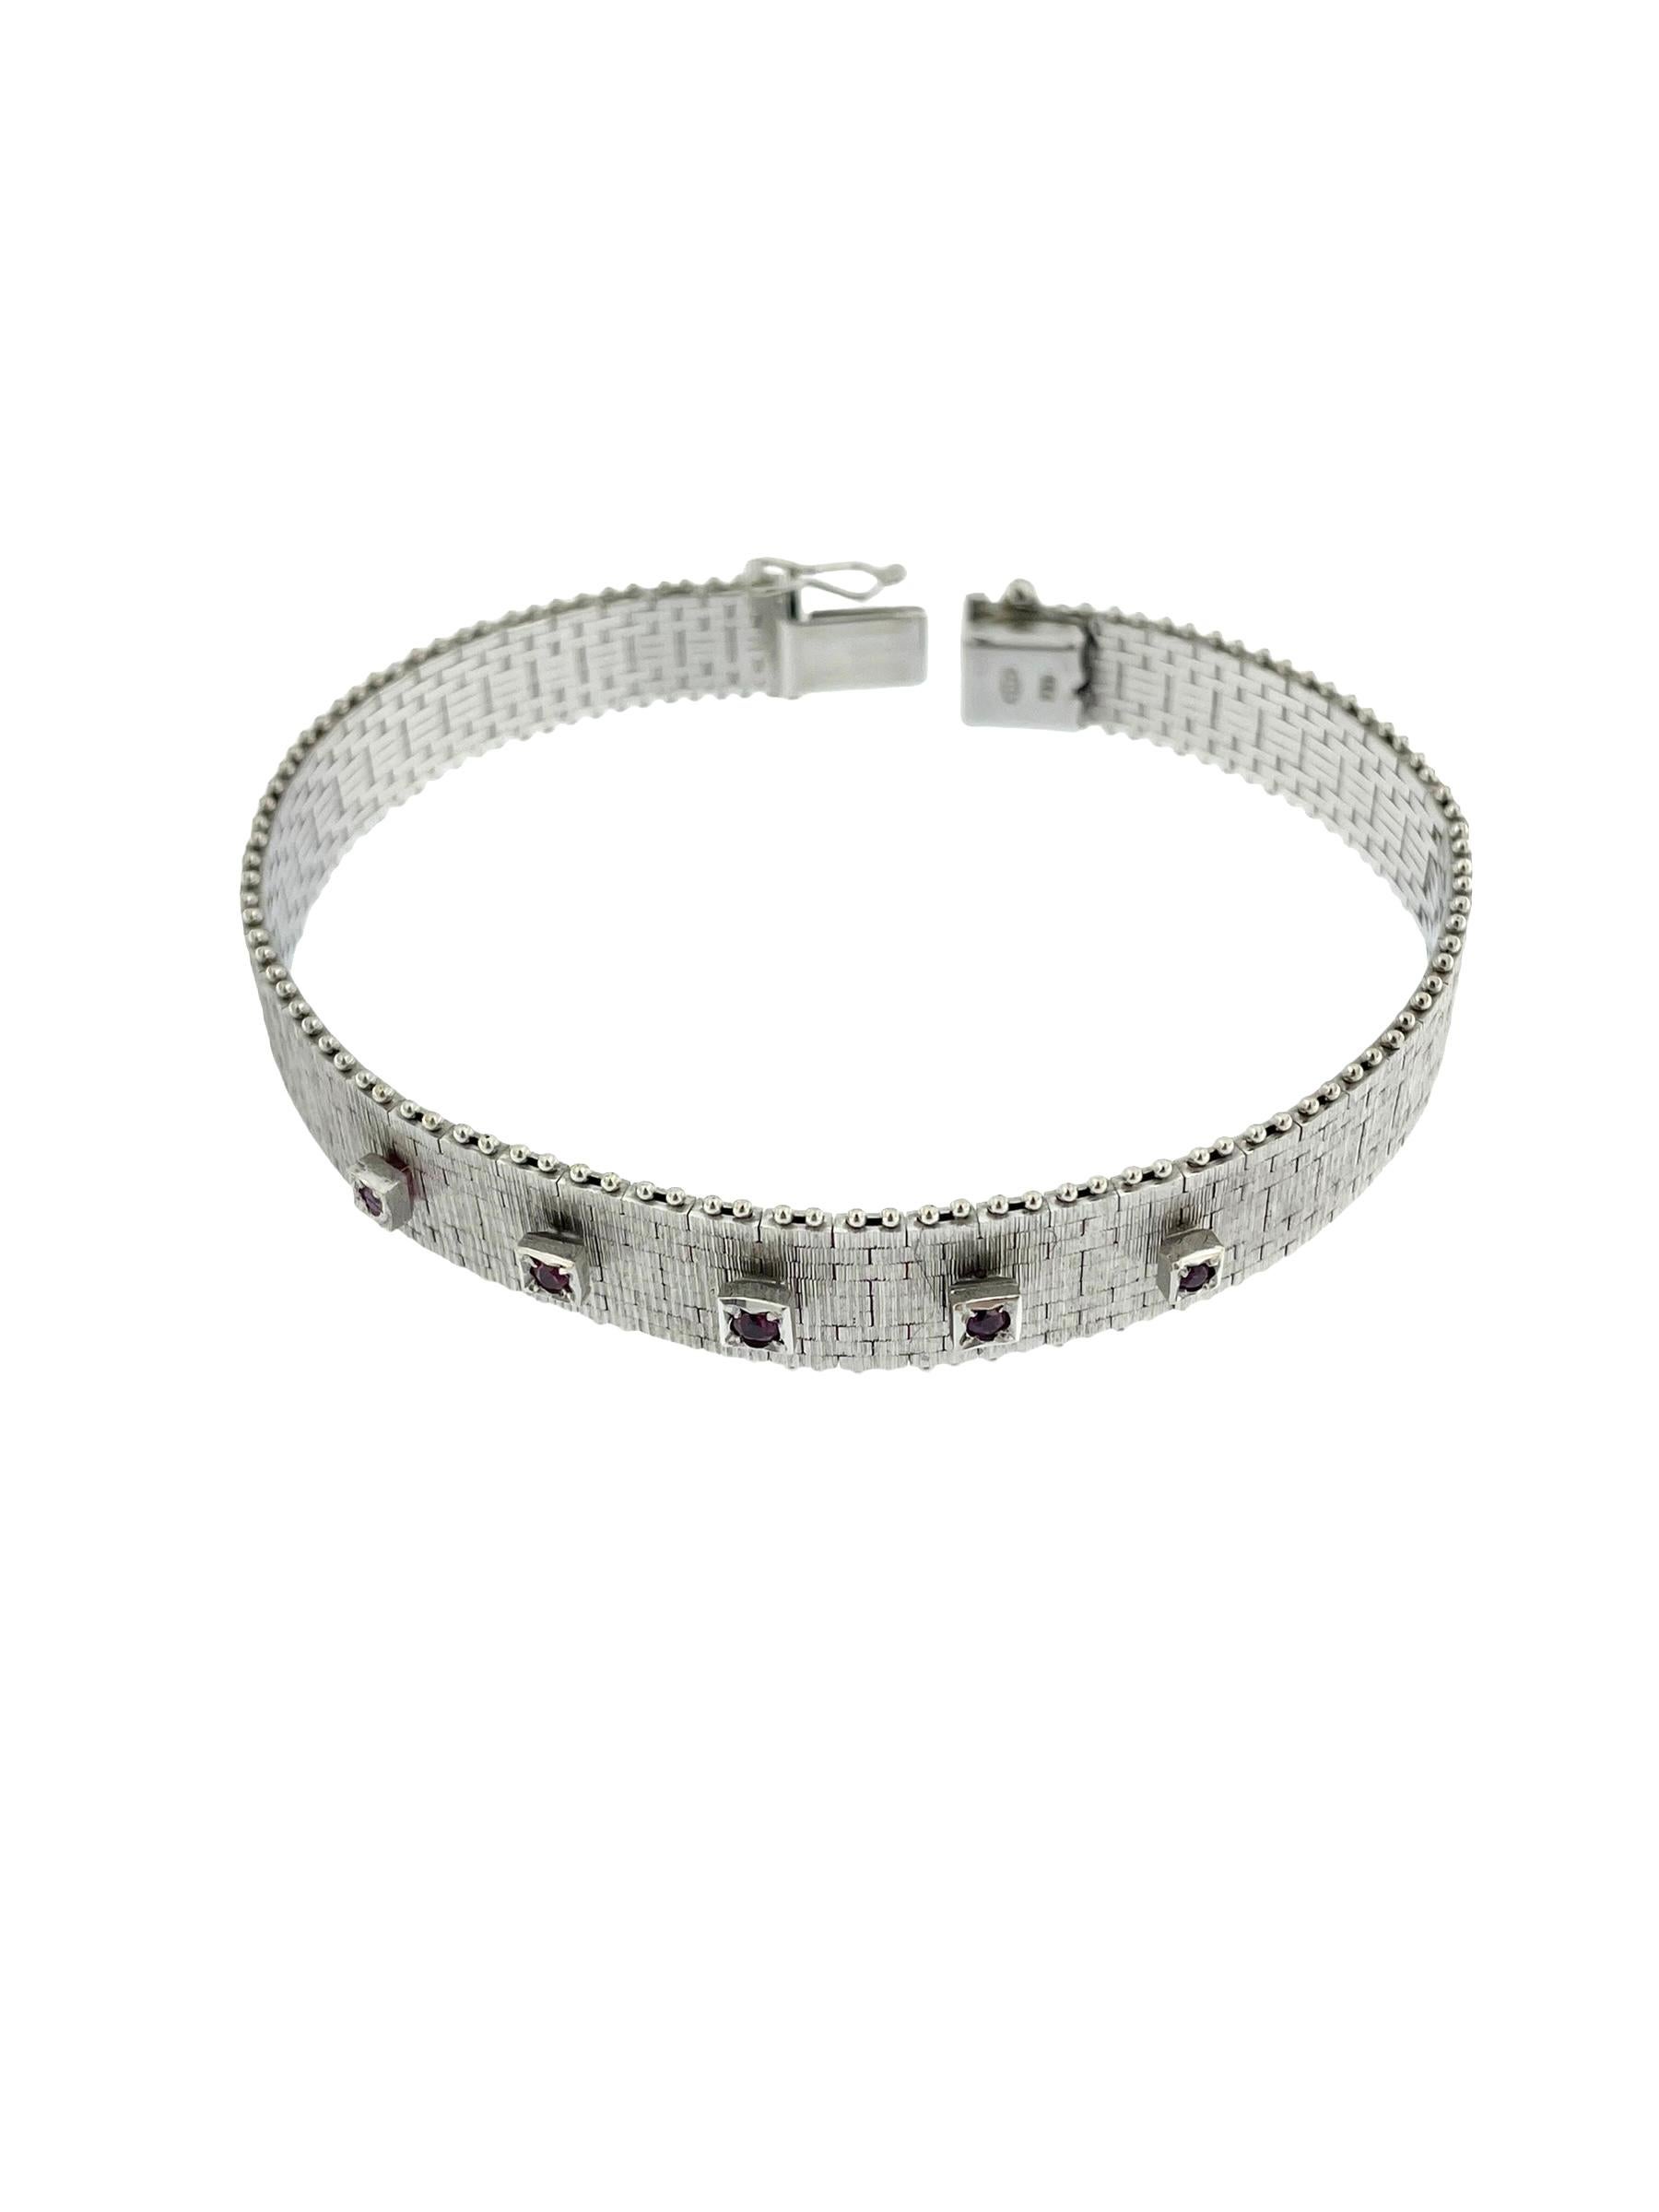 Women's or Men's Mid-Century White Gold Bracelet with Rubies For Sale